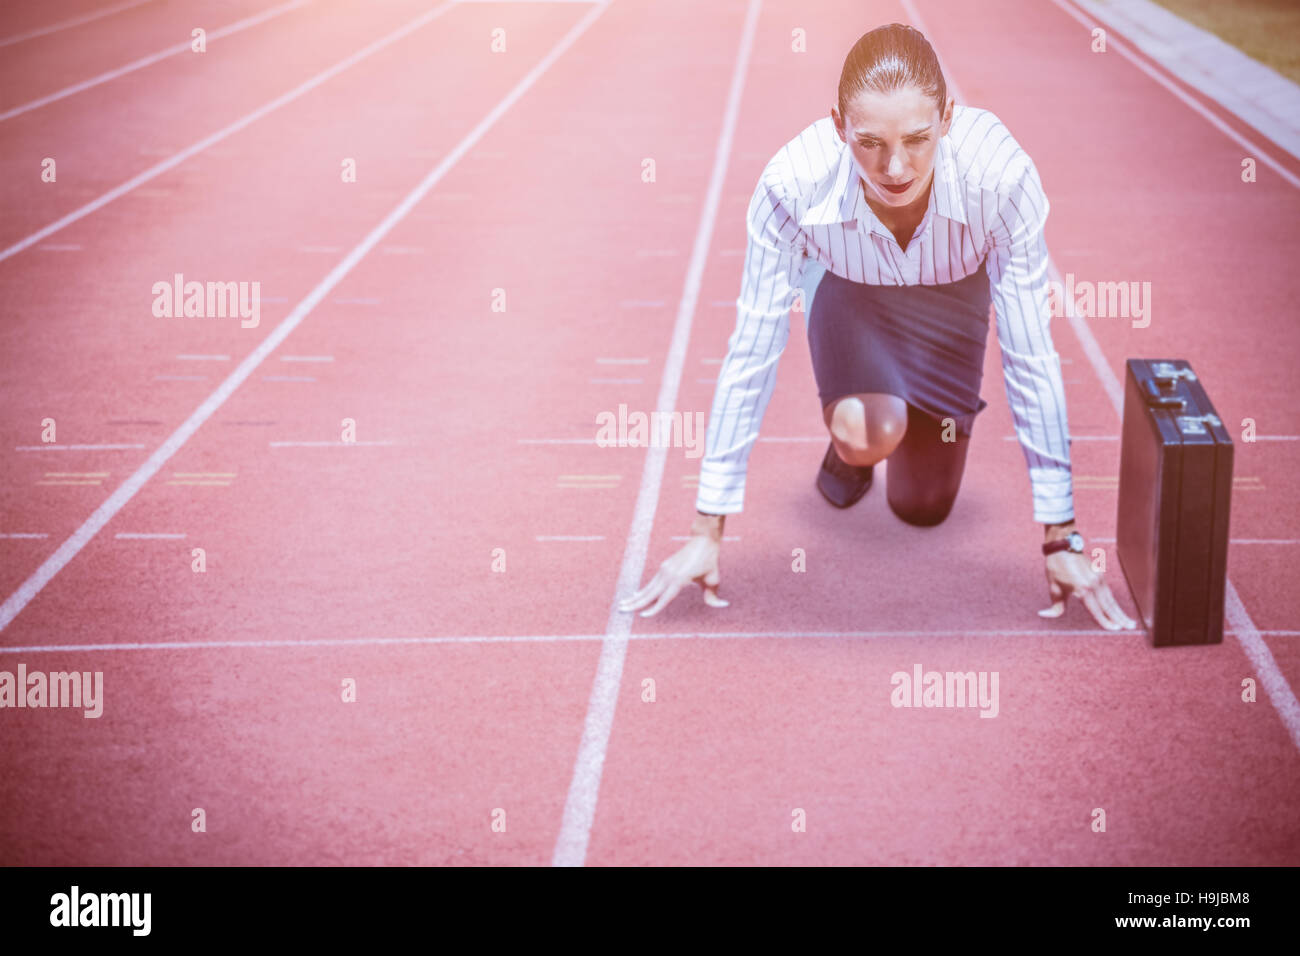 Composite image of concentrate woman in starting blocks Stock Photo